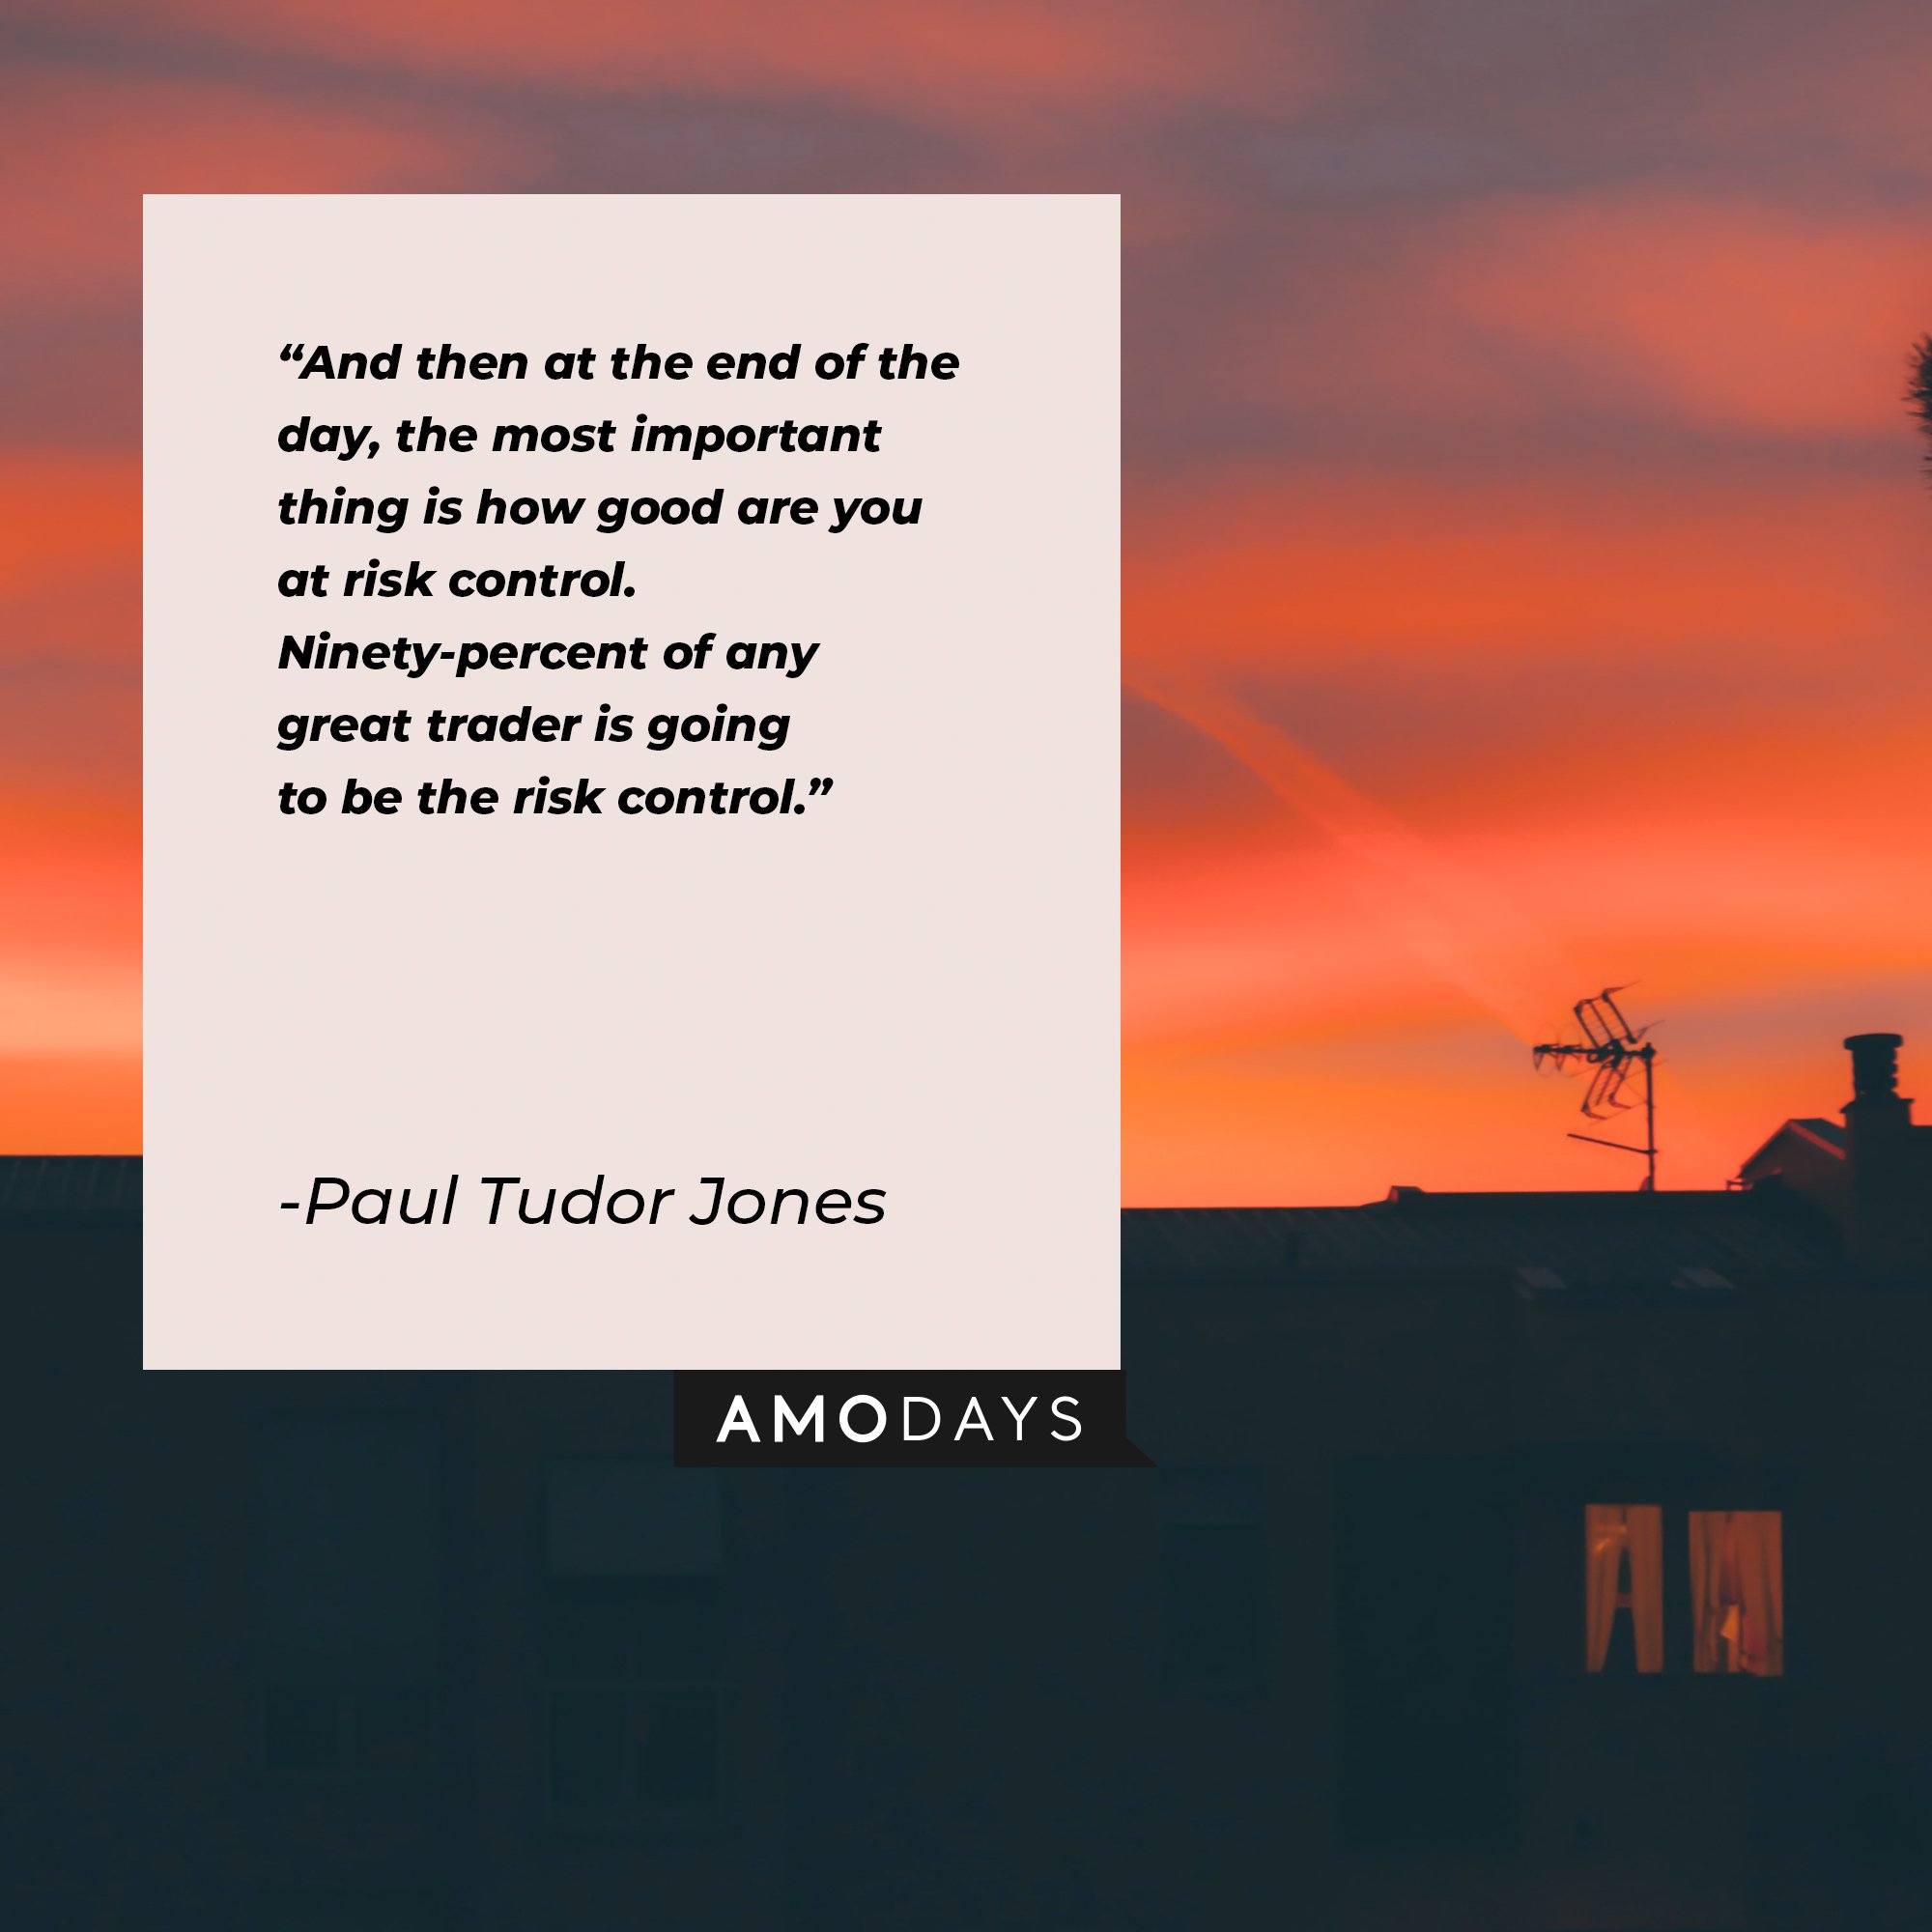 Paul Tudor Jones’s quote: “And then, at the end of the day, the most important thing is how good are you at risk control. Ninety percent of any great trader is going to be the risk control.” | Image: AmoDays    